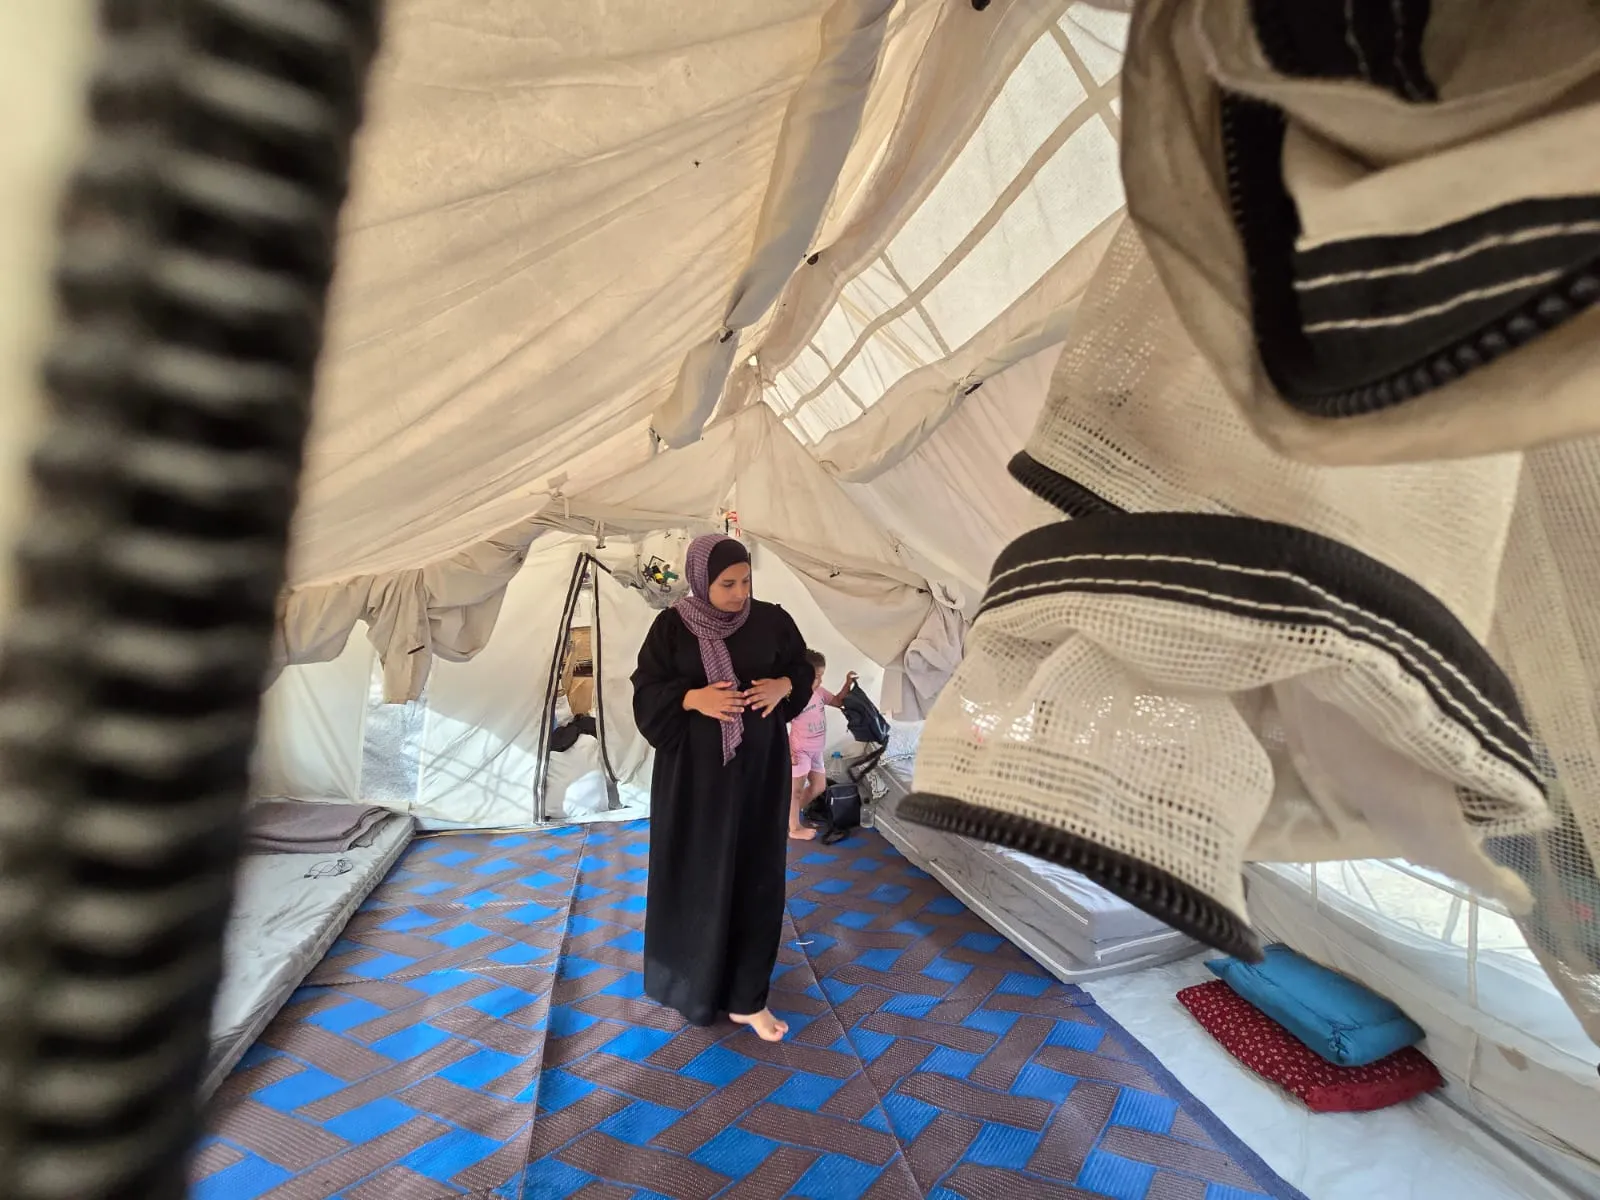 A wide-angle shot of a woman wearing black walking through a tent.